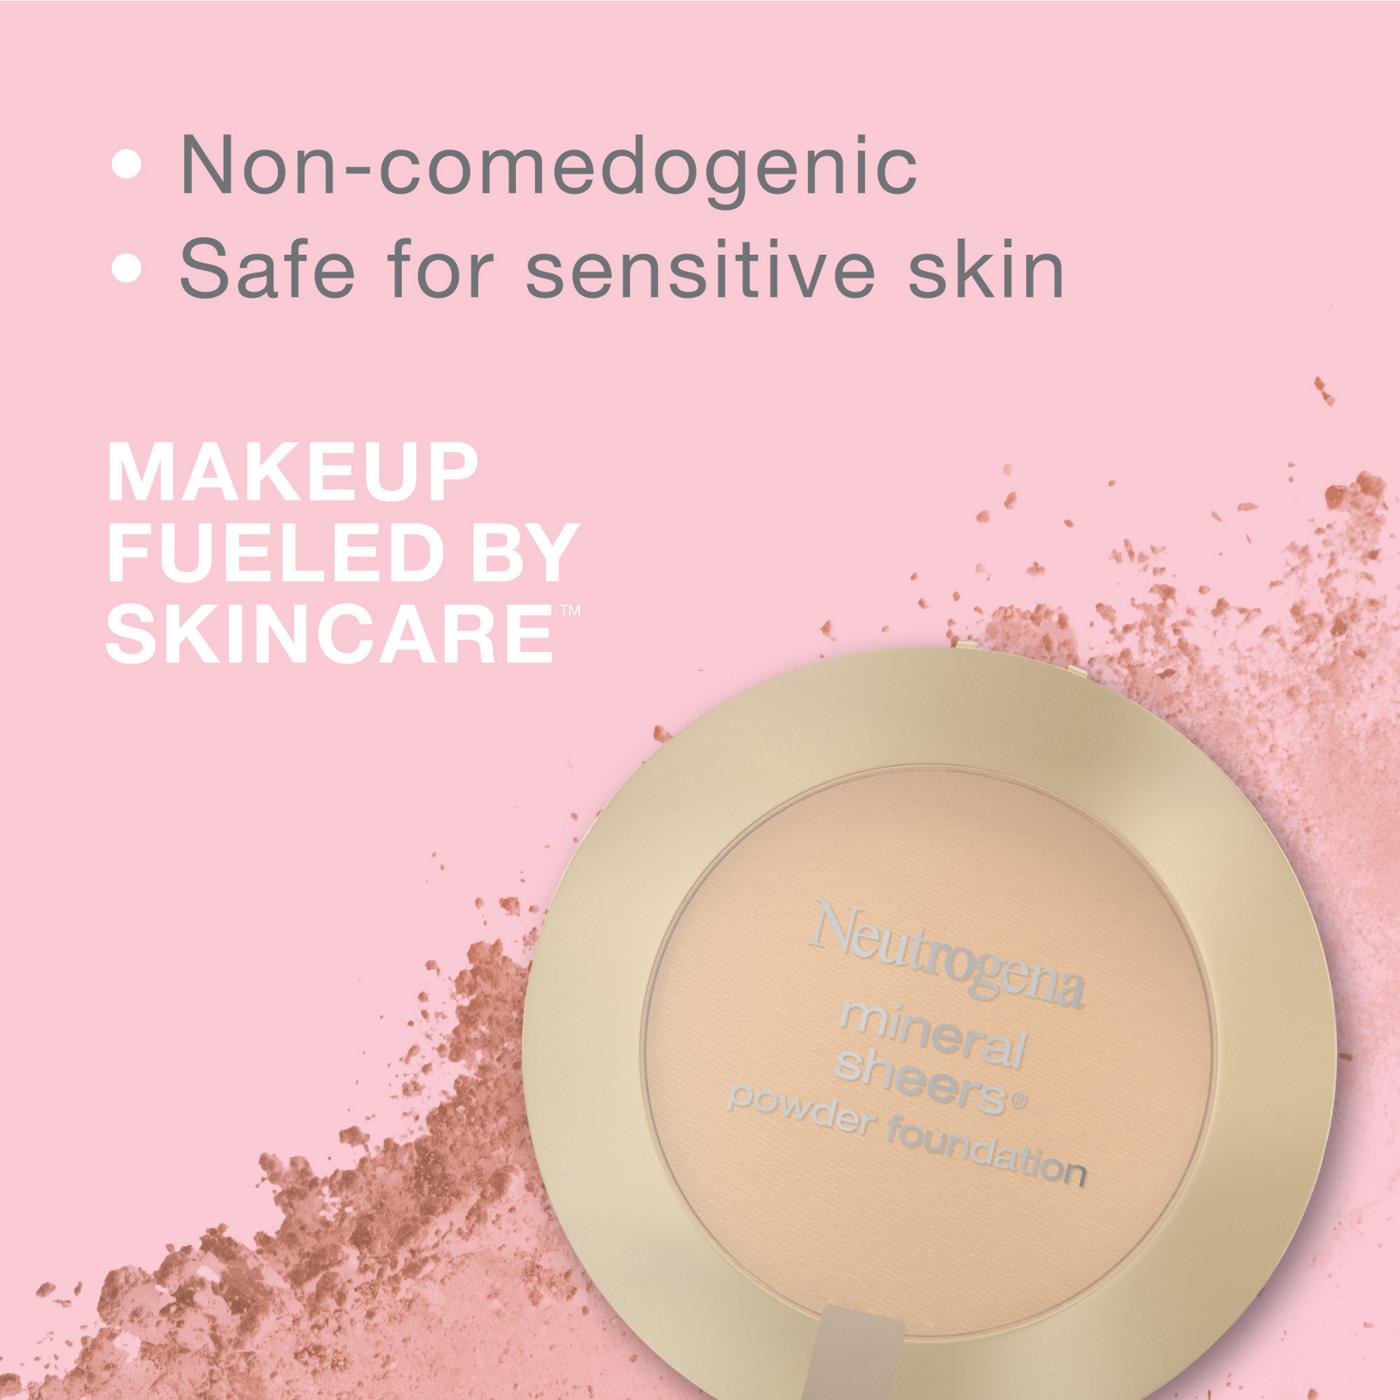 Neutrogena Mineral Sheers Compact Powder Foundation 80 Tan; image 3 of 6